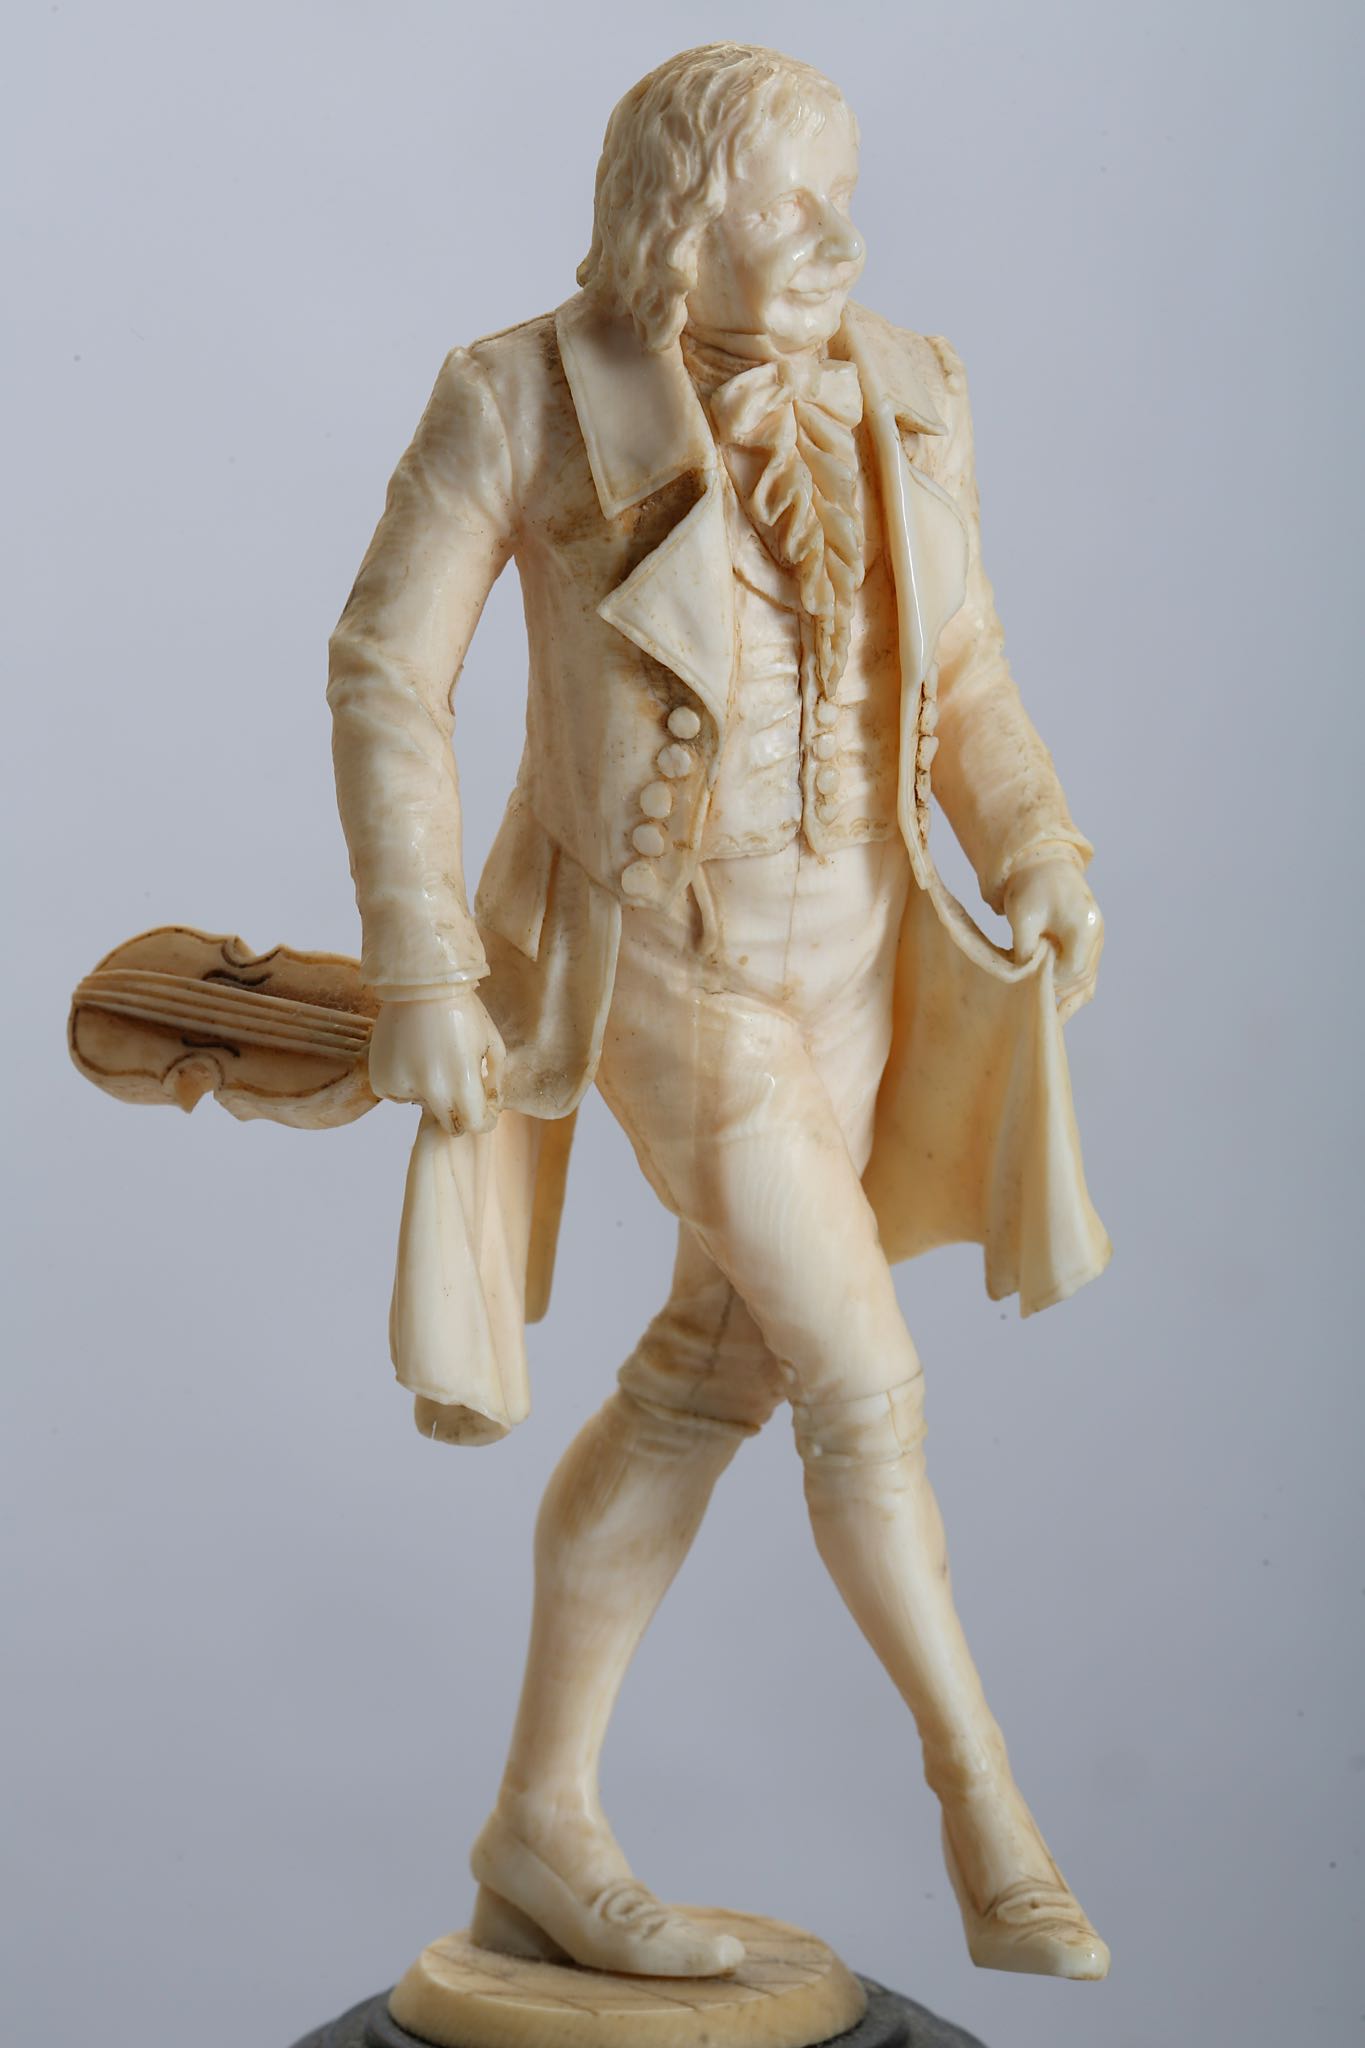 A PAIR OF EARLY 19TH CENTURY FRENCH (DIEPPE) IVORY FIGURES OF A LADY AND GENTLEMAN DANCING the - Image 5 of 7